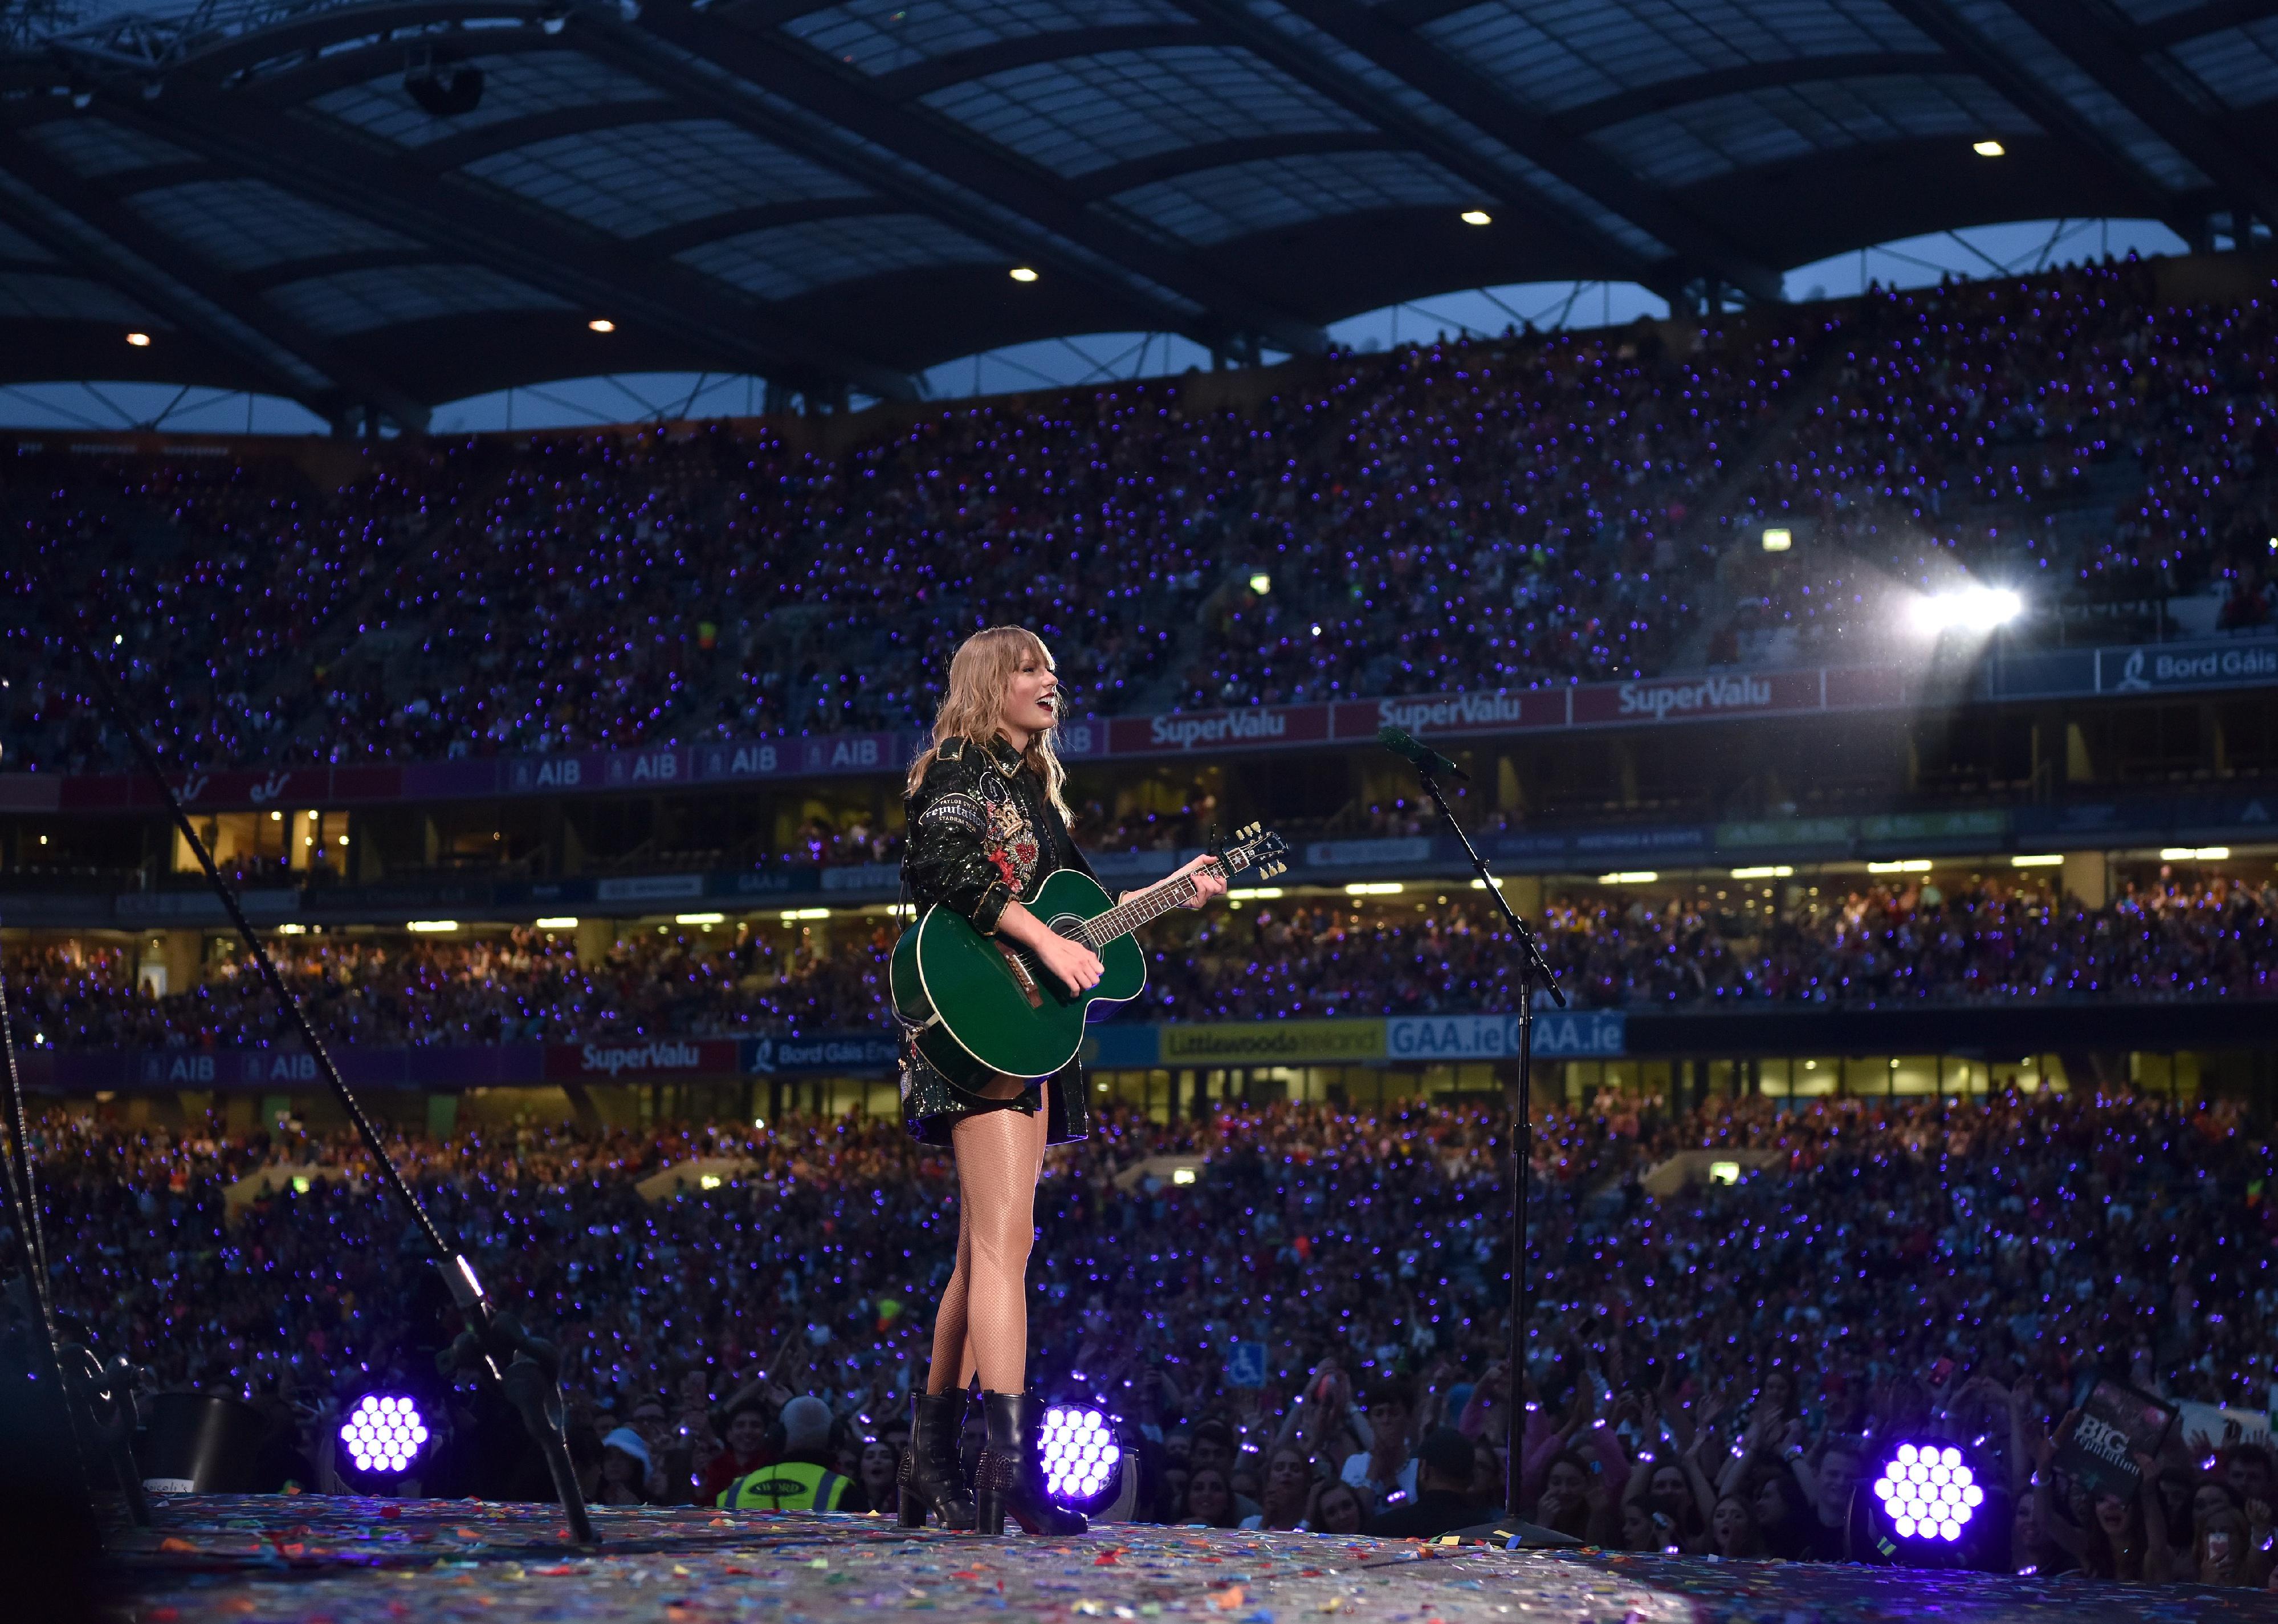 <p>Taylor Swift's stadium tour in support of her studio album "Reputation" became the <a href="https://www.forbes.com/sites/brittanyhodak/2018/11/30/taylor-swift-breaks-u-s-record-with-reputation-stadium-tour/">highest-grossing tour in U.S. history</a>. The shows interweaved Broadway-style bombast with a recurring gothic theme and earned Swift some of her highest critical accolades to date. Her stop in Dallas was recorded and released as a concert film on Netflix.</p>